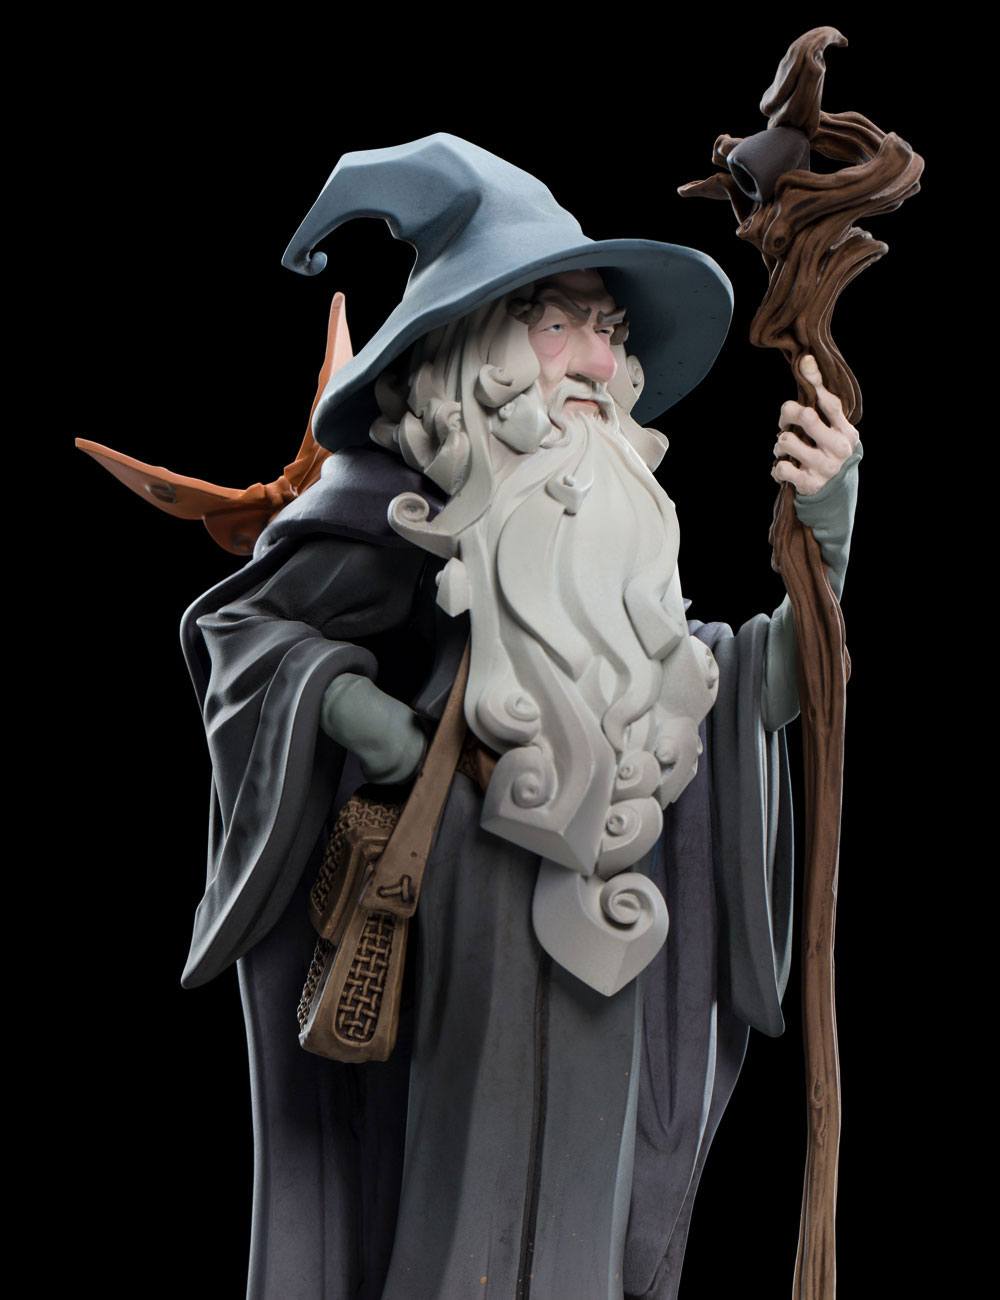 Lord of the Rings Mini Epics Vinyl Figure Gandalf The Grey 18cm - Loaded Dice Barry Vale of Glamorgan CF64 3HD